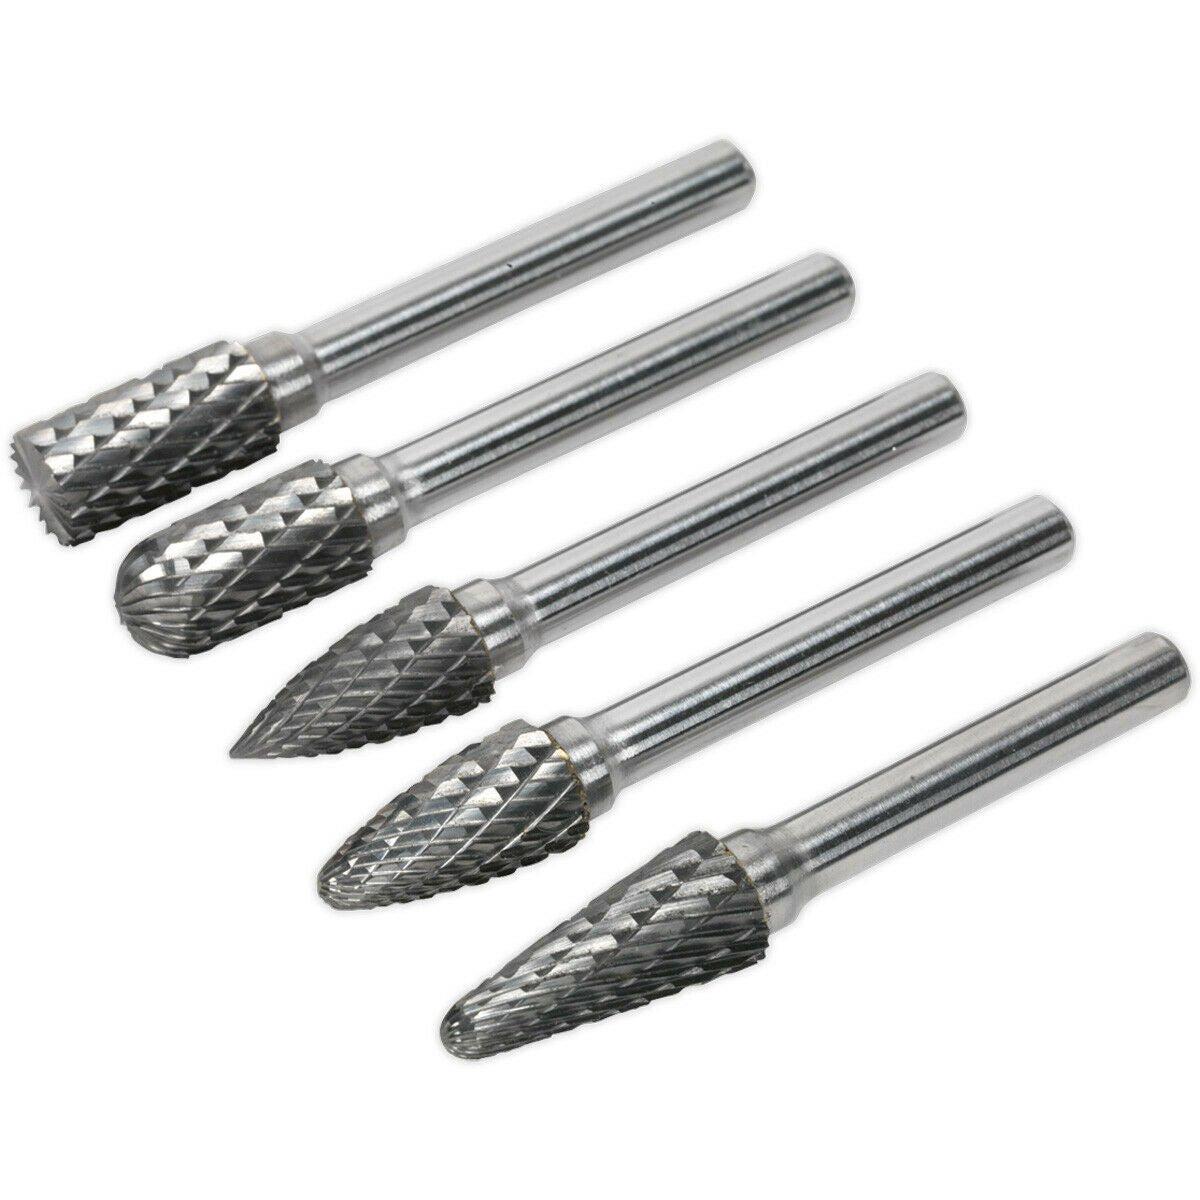 5 PACK - 10mm Tungsten Carbide Rotary Burr Bits Set - VARIOUS Cutting Heads